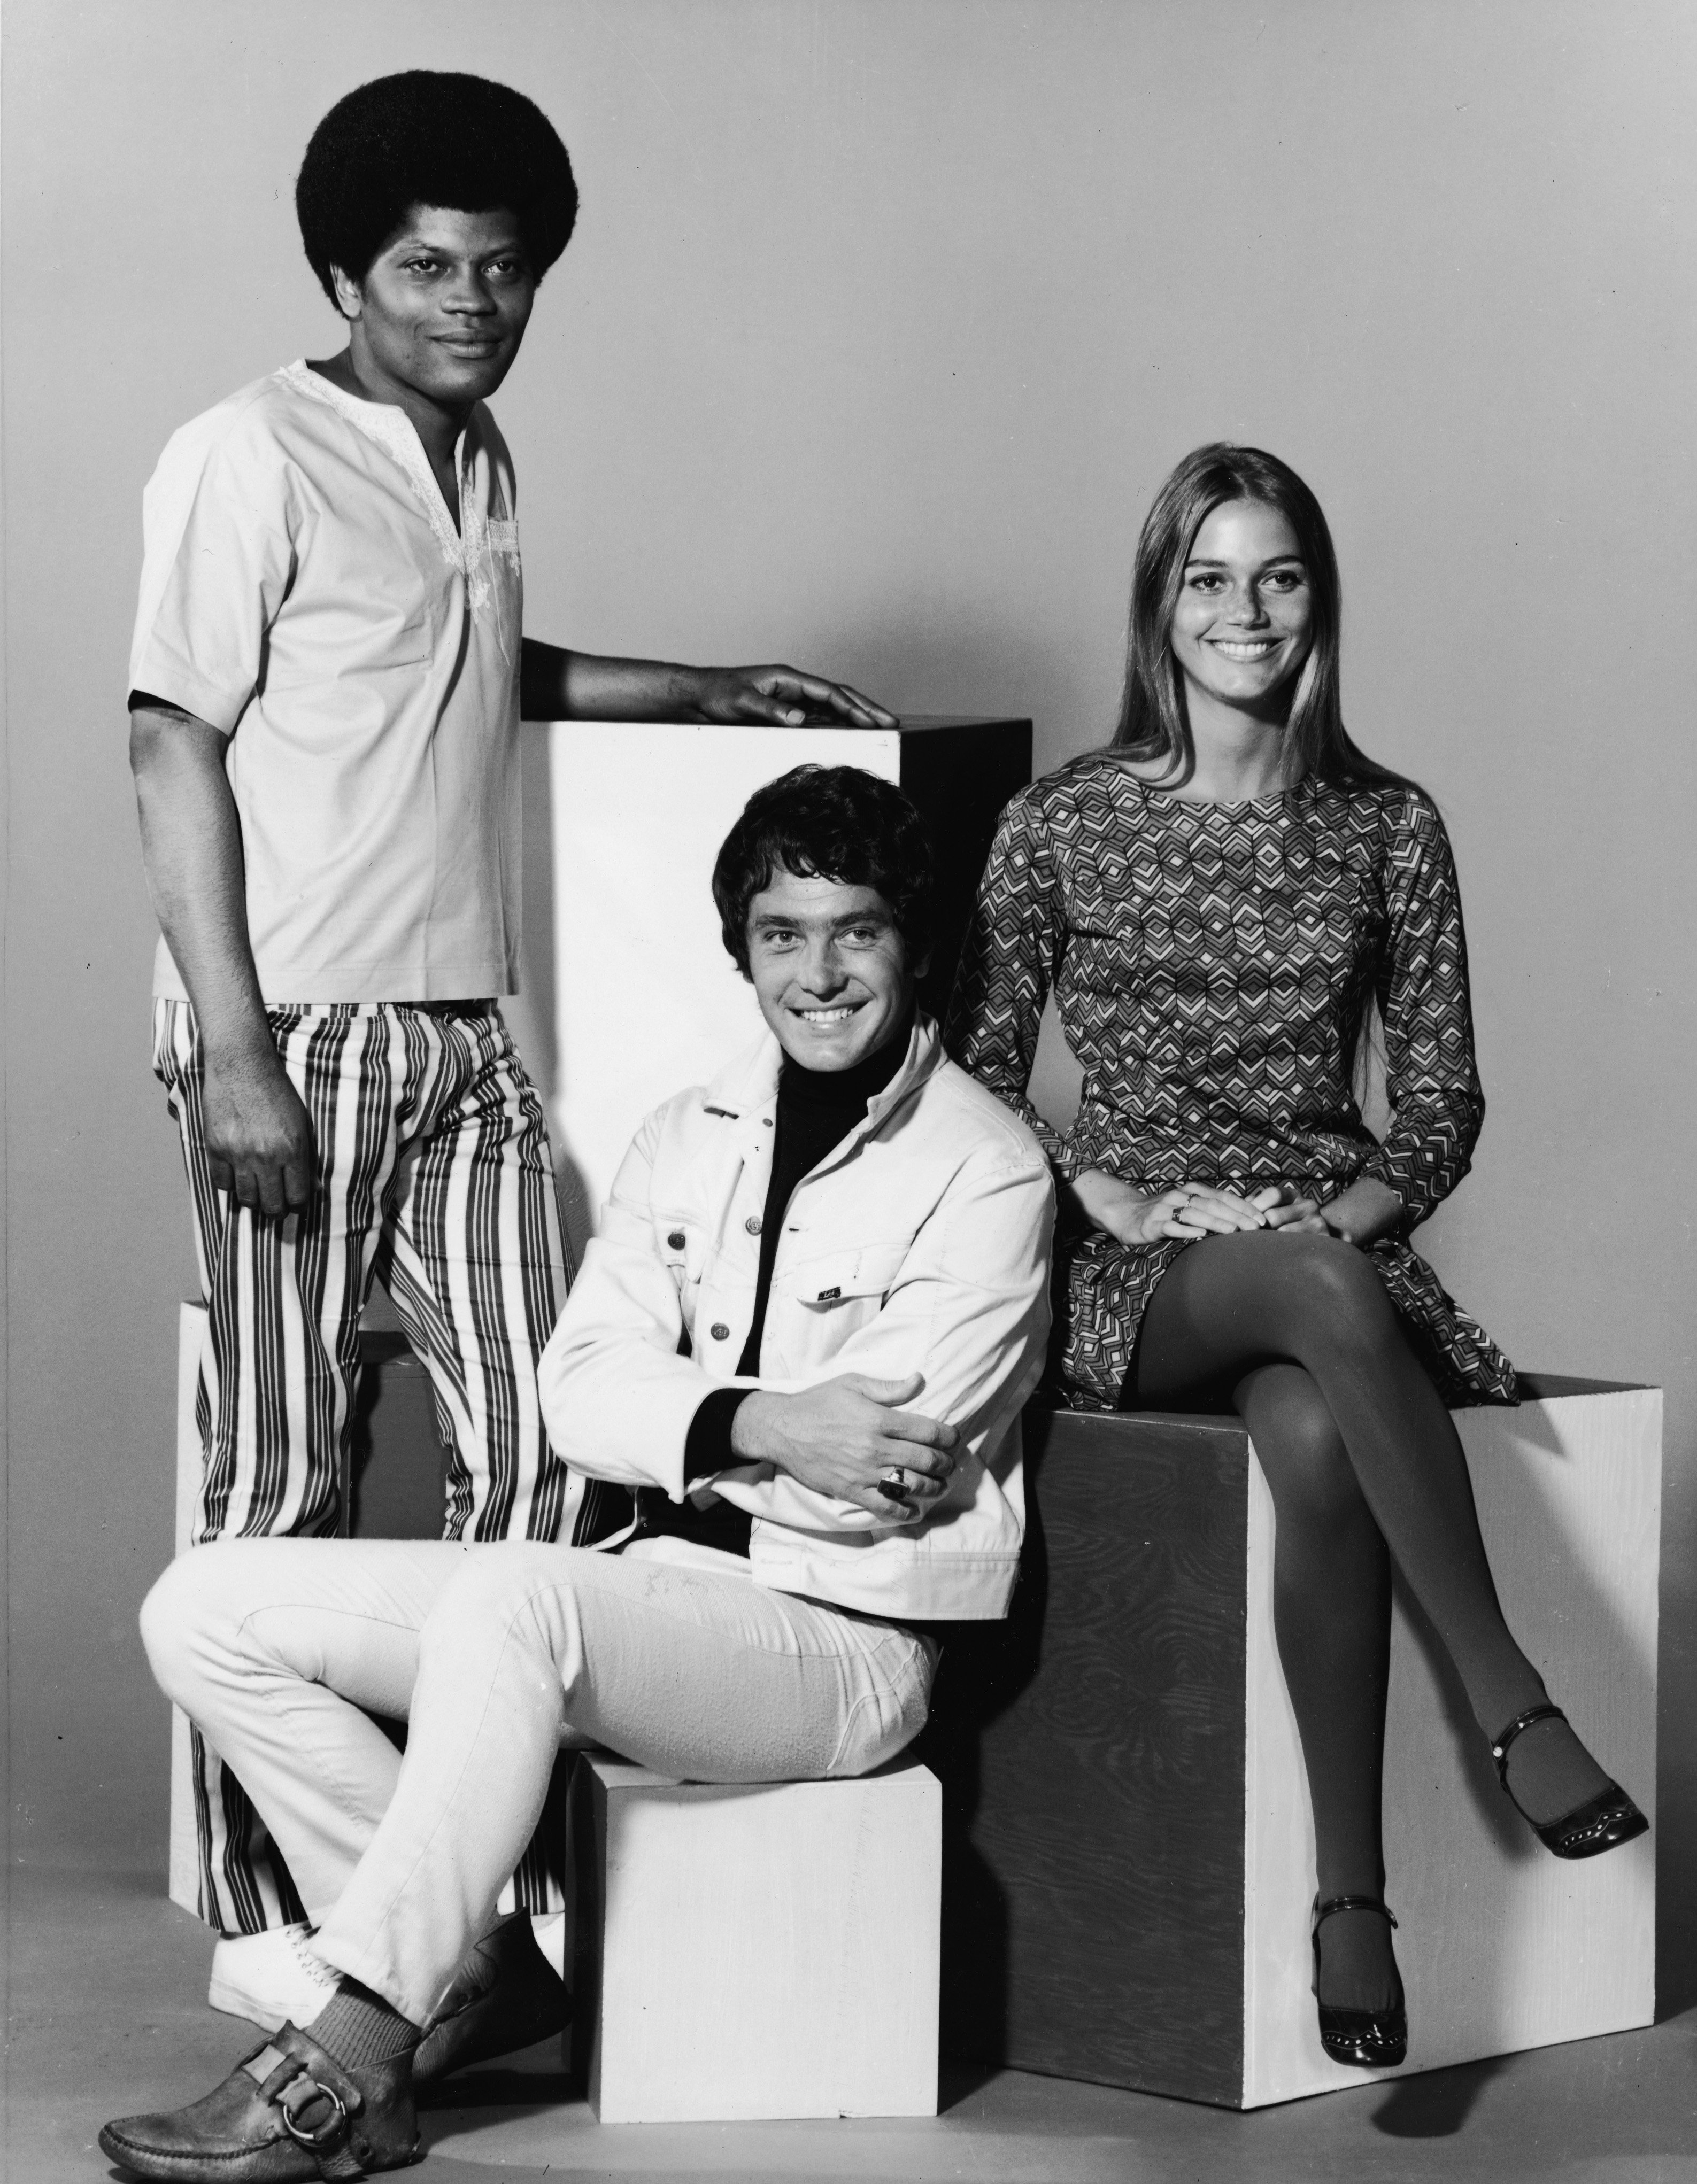 Peggy Lipton posing with Clarence Williams III and Michael Cole for the show "The Mod Squad" in 1968. | Photo: Getty Images